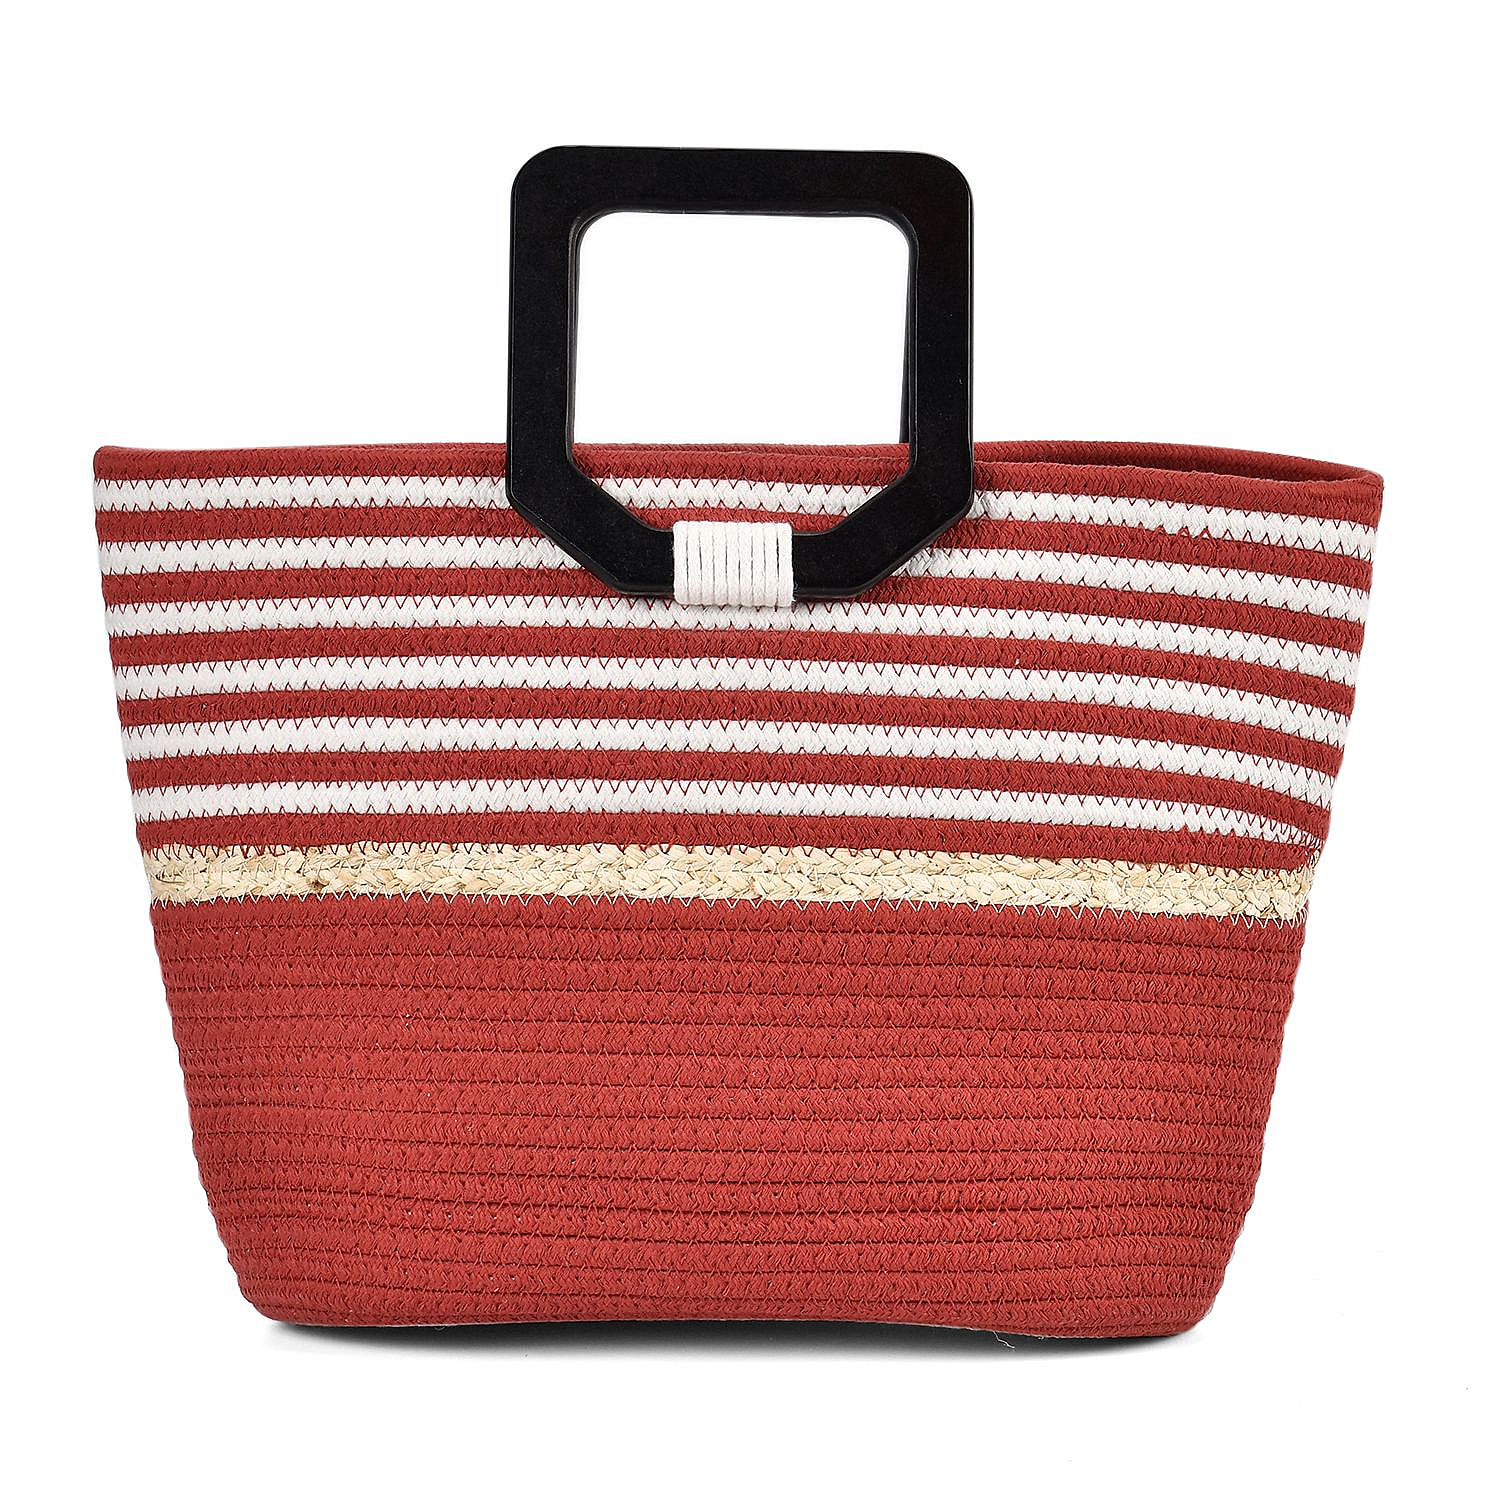 Cotton Knitted Patterned Tote Bag